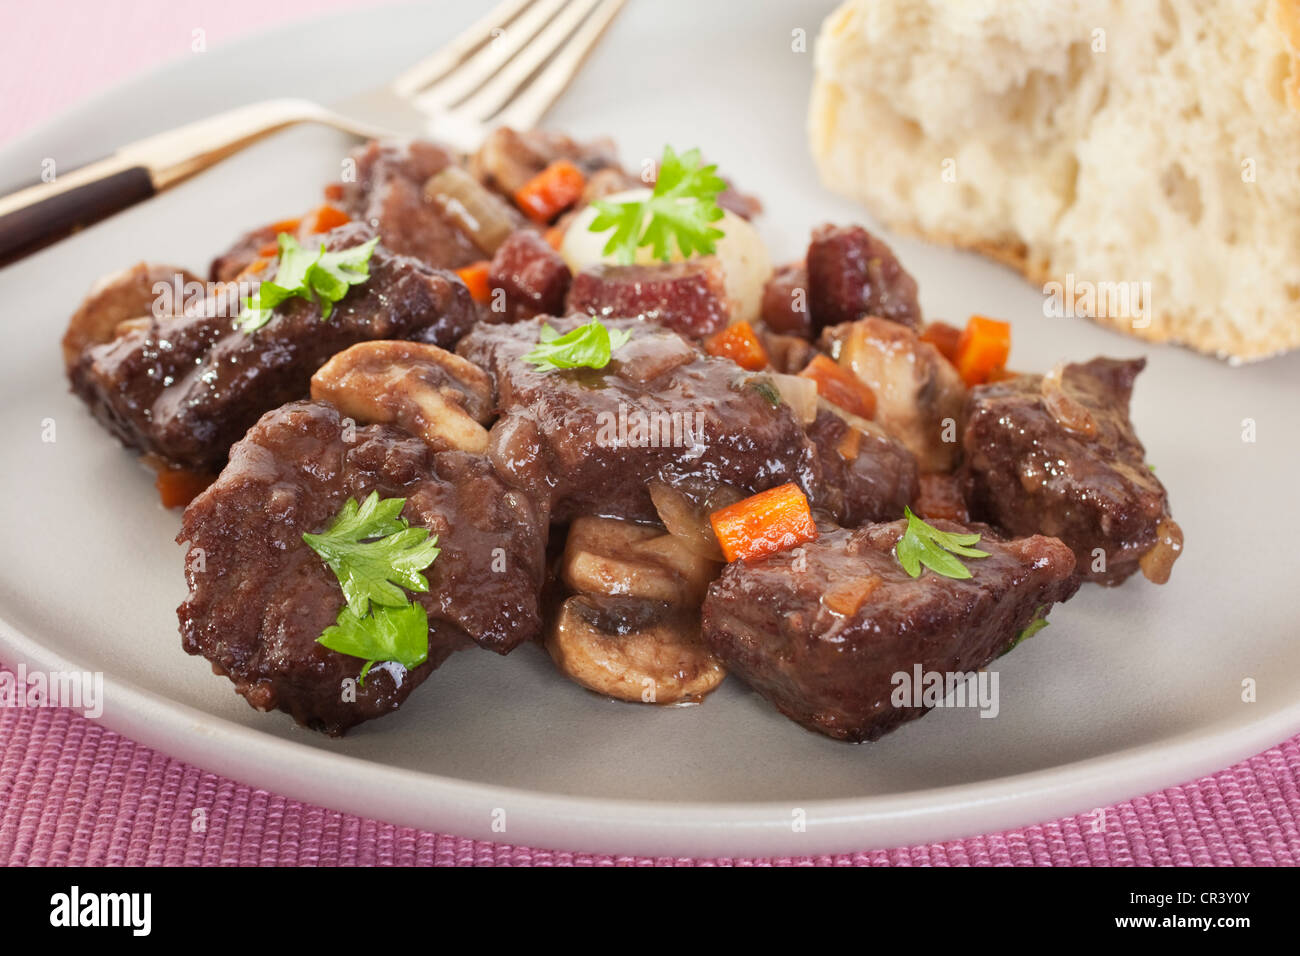 Classic beef bourguignon served with crusty bread. Stock Photo